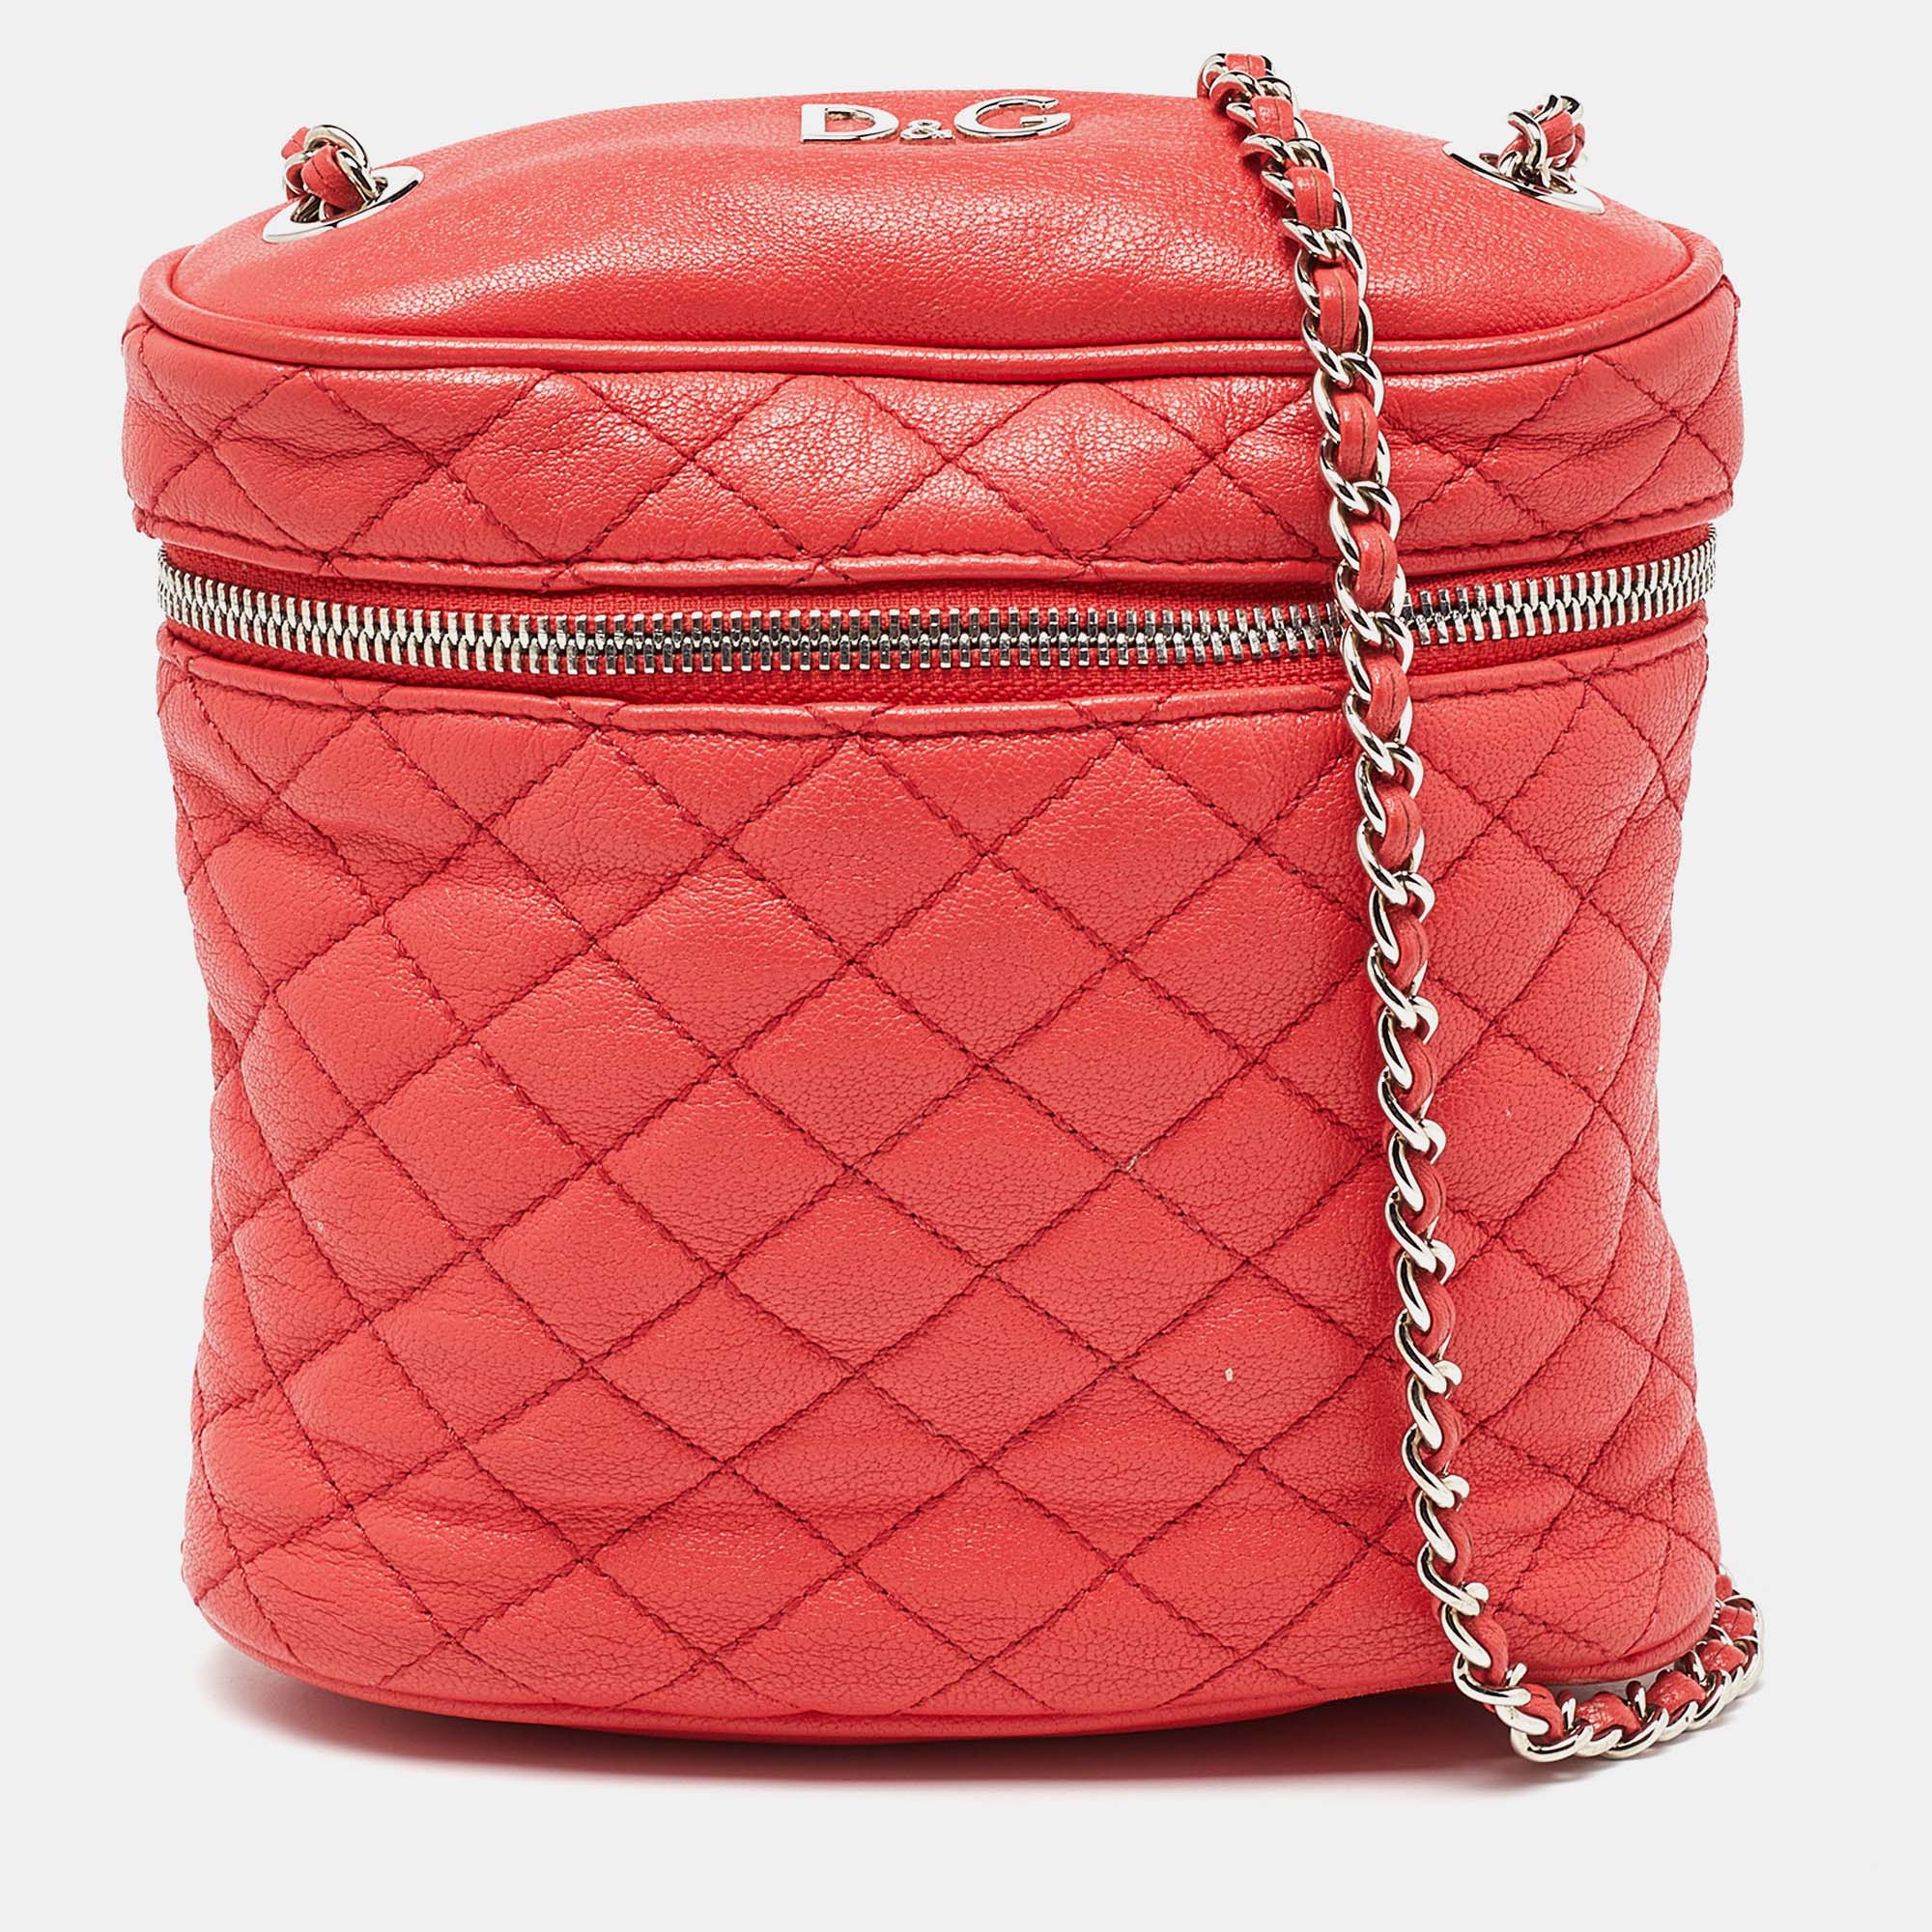 D&g red leather lily glam chain crossbody bag